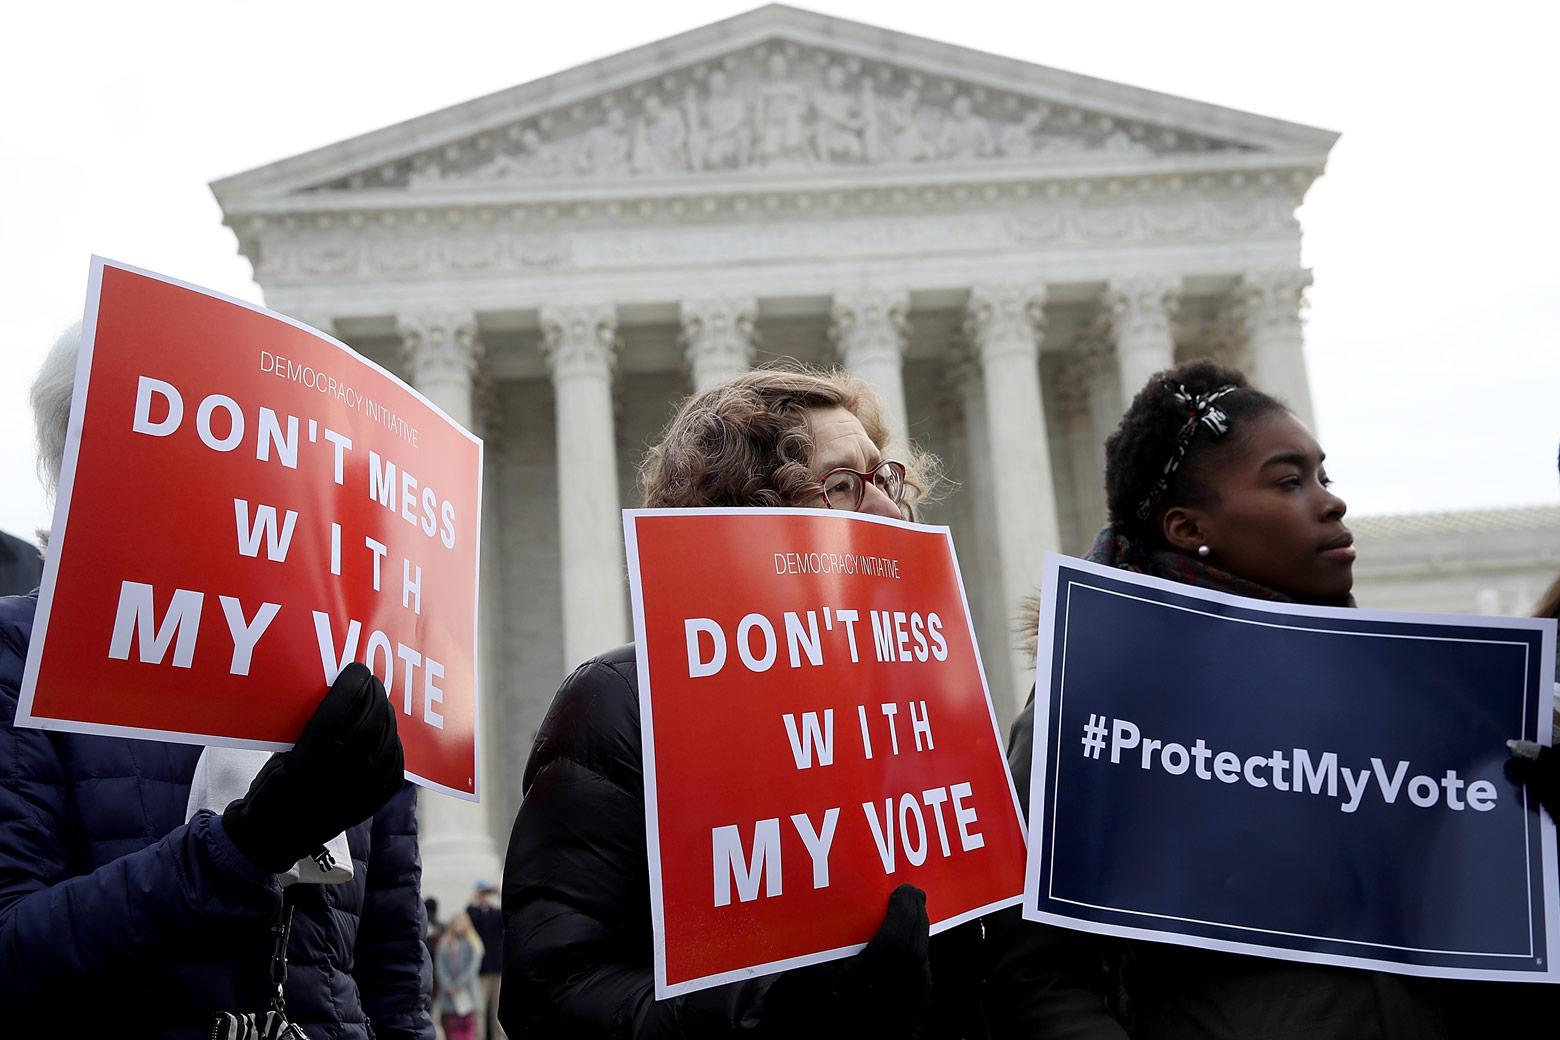 Three protesters hold signs saying “Don’t Mess With My Vote” and “#ProtectMyVote” on Wednesday in front of the Supreme Court building in Washington. Photo by Win McNamee/Getty Images.